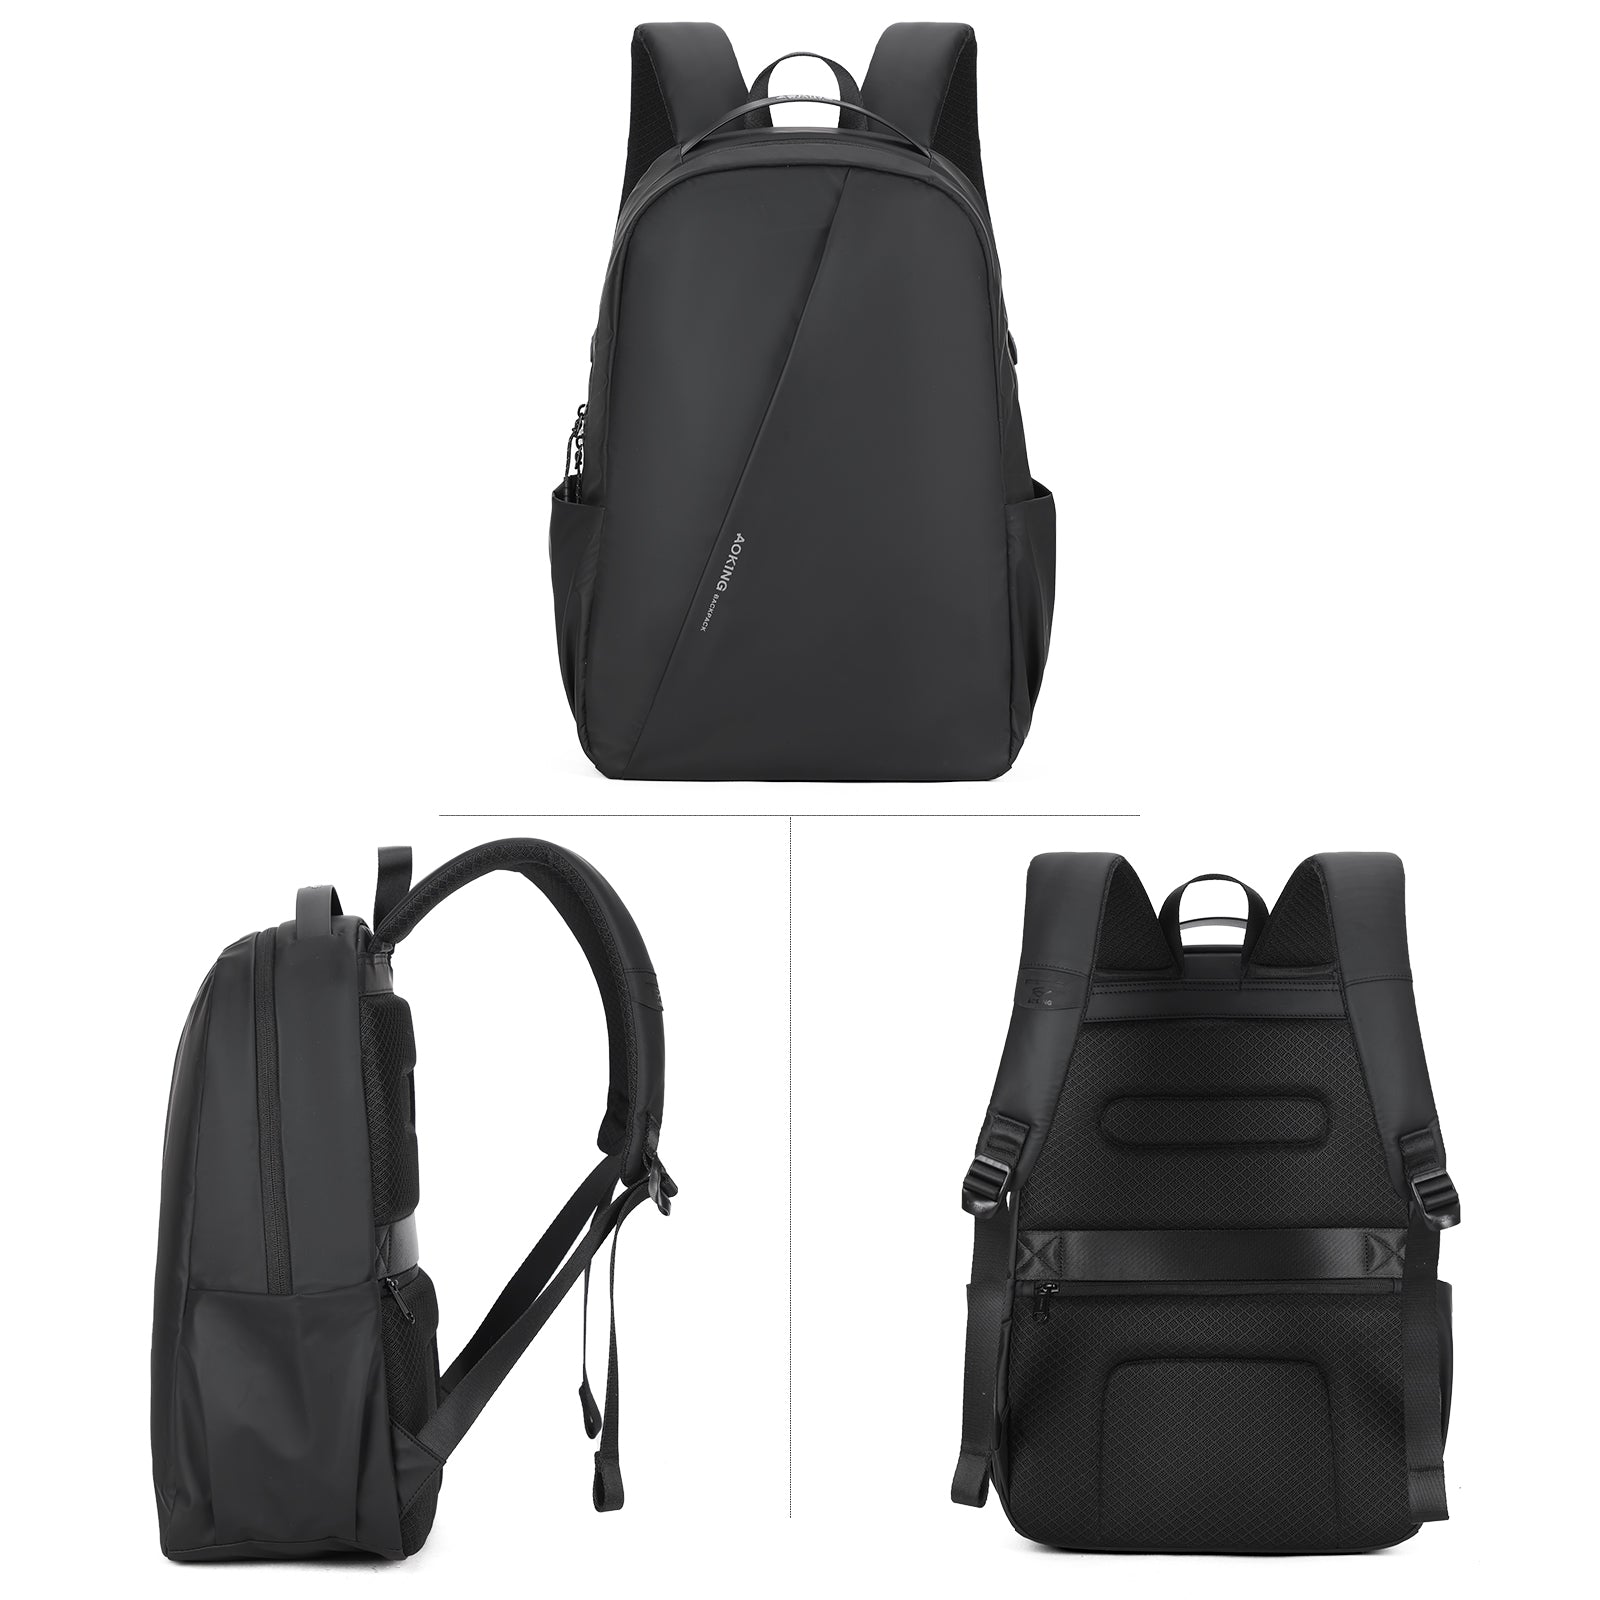 Aoking Fashion Backpack Laptop Business Backpack SN4005-5